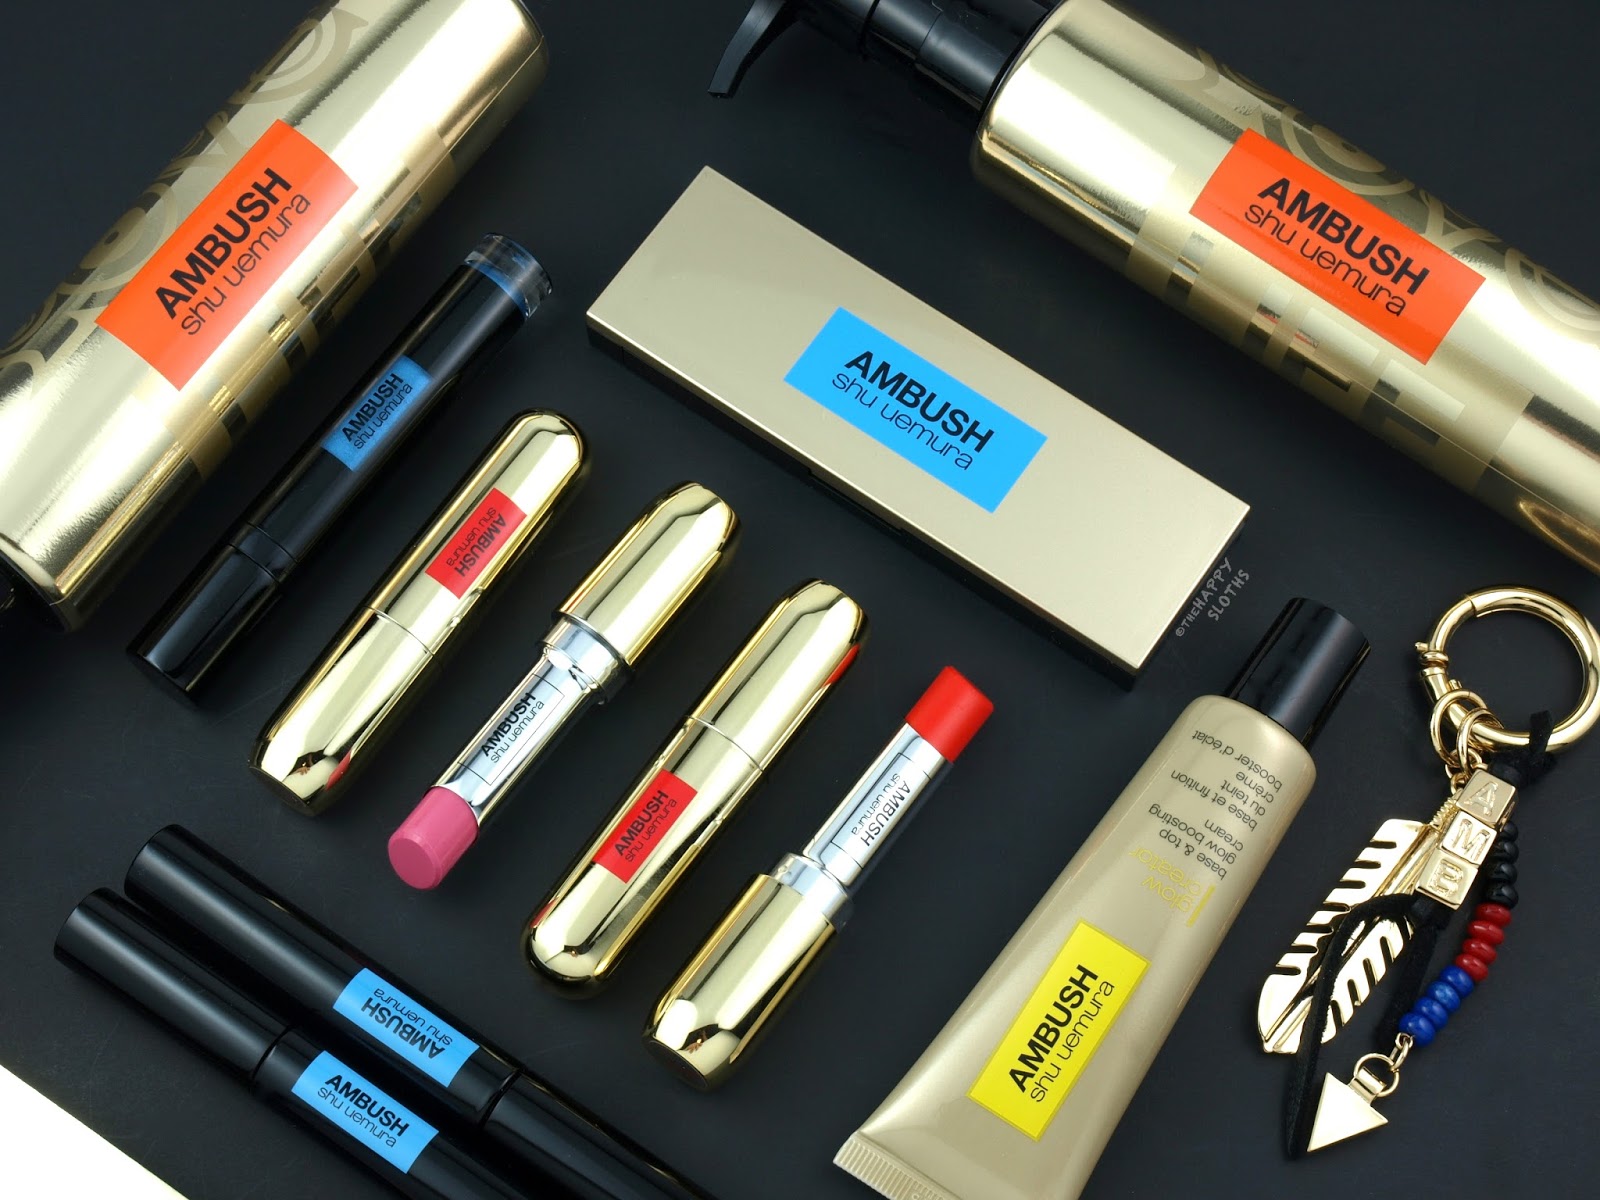 Shu Uemura x AMBUSH Collection: Review and Swatches